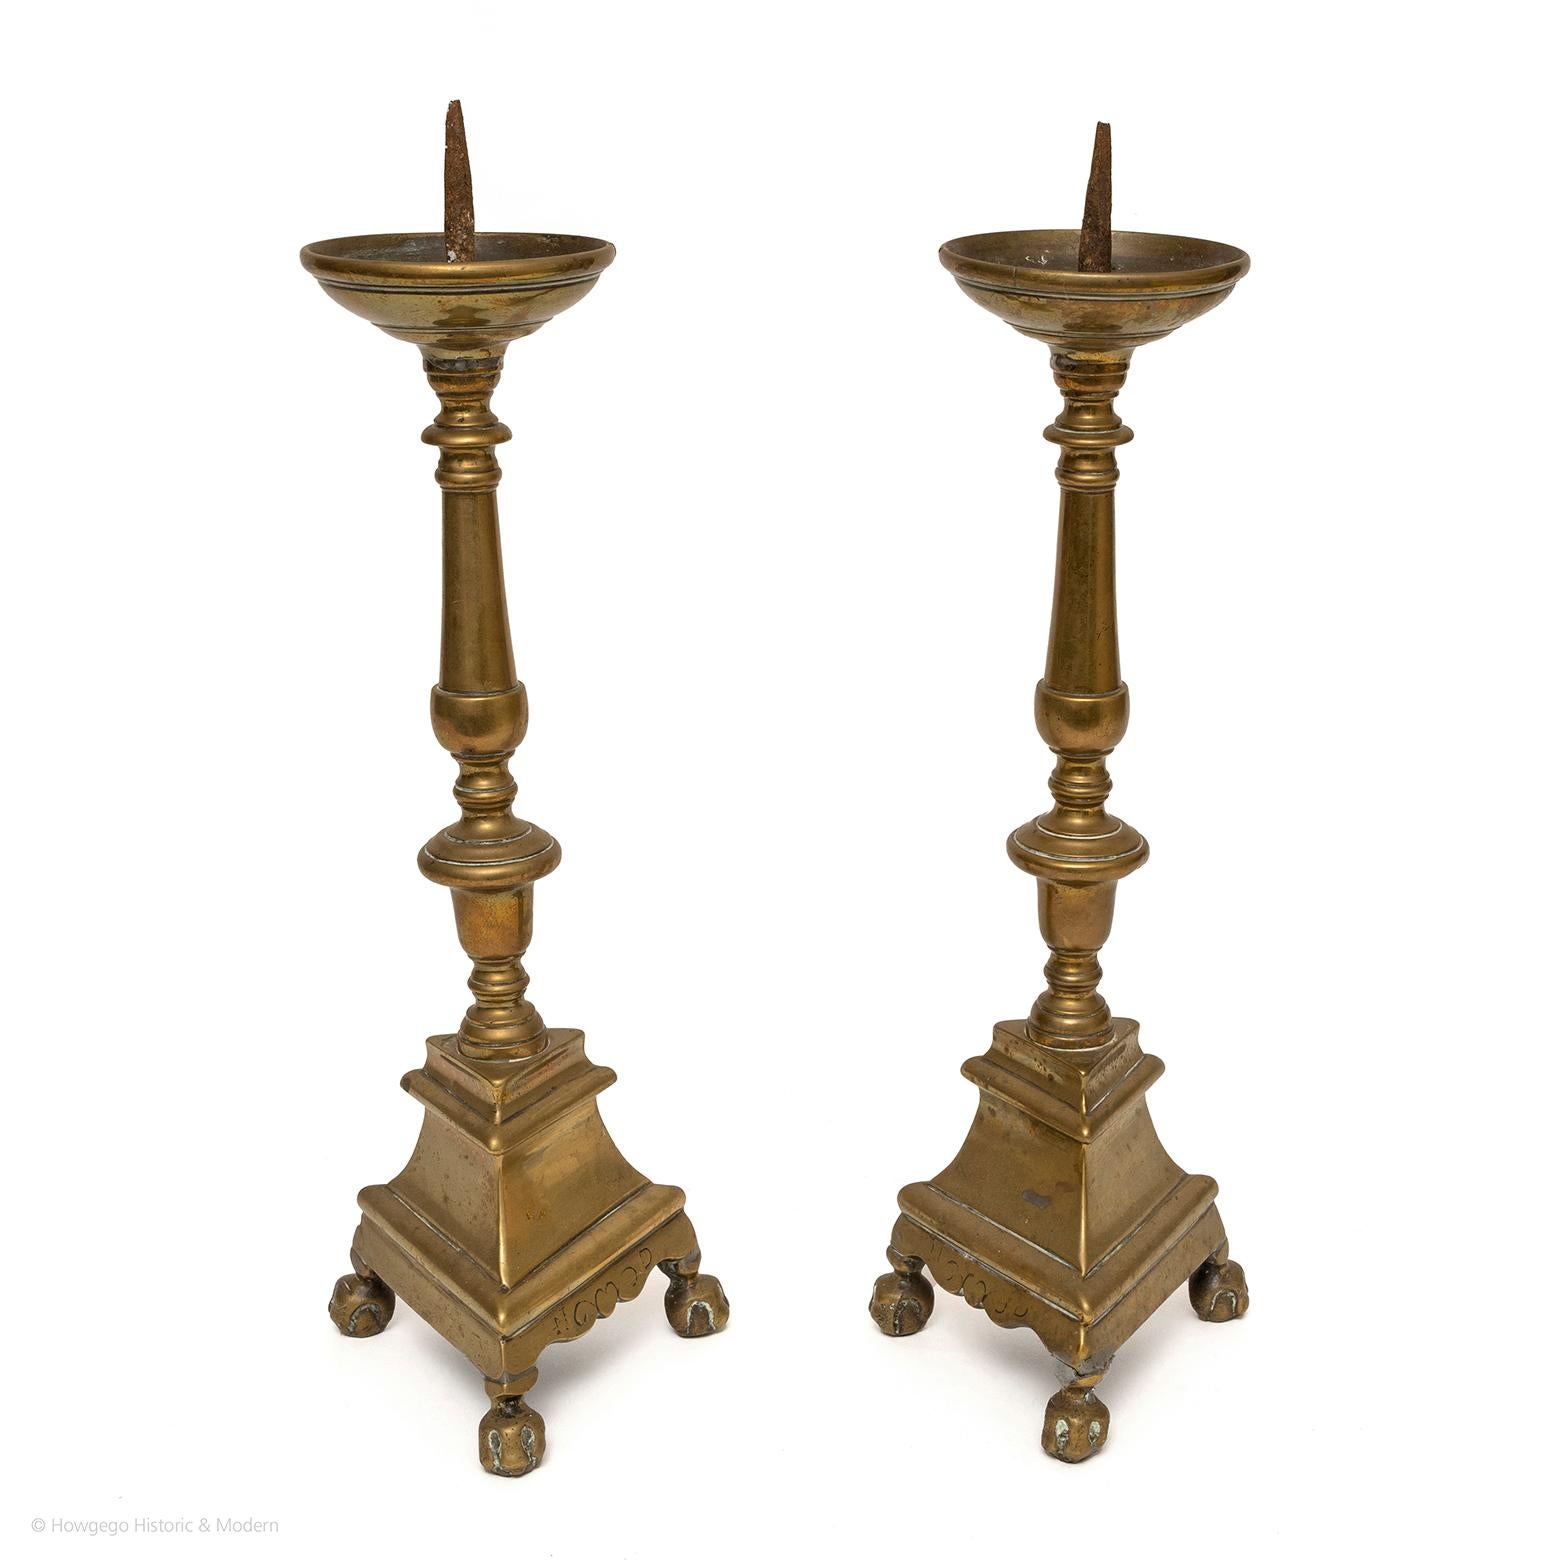 FINE PAIR OF LATE 17TH CENTURY, PERSONALISED, FLEMISH, BRASS CANDLESTICKS WITH PRICKETS, POSSIBLY A LOVE TOKEN AS INSCRIBED WITH A HEART MOTIF AND INITIALS 
- Personalised : The bottom edge of one side is incised to form a heart & the initials N &